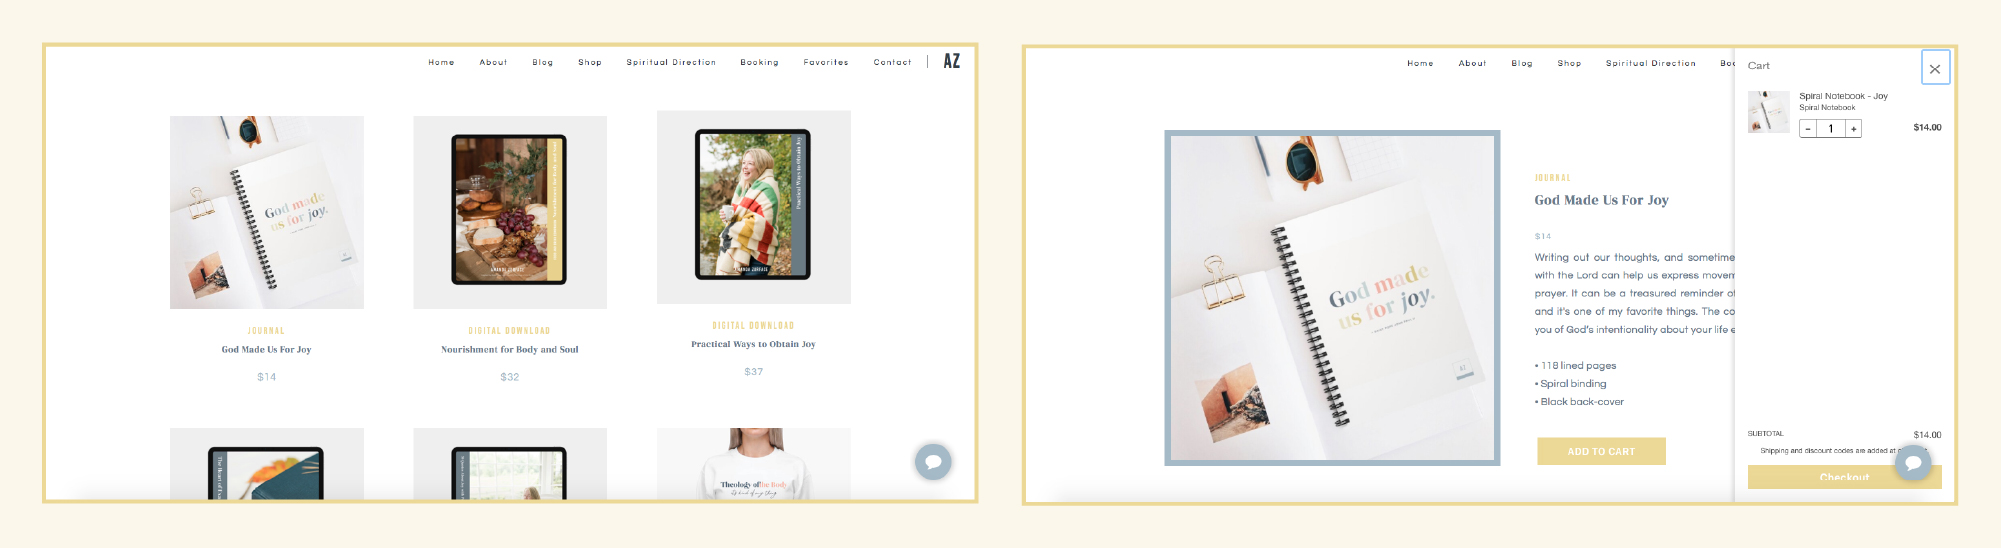 Showit eCommerce examples